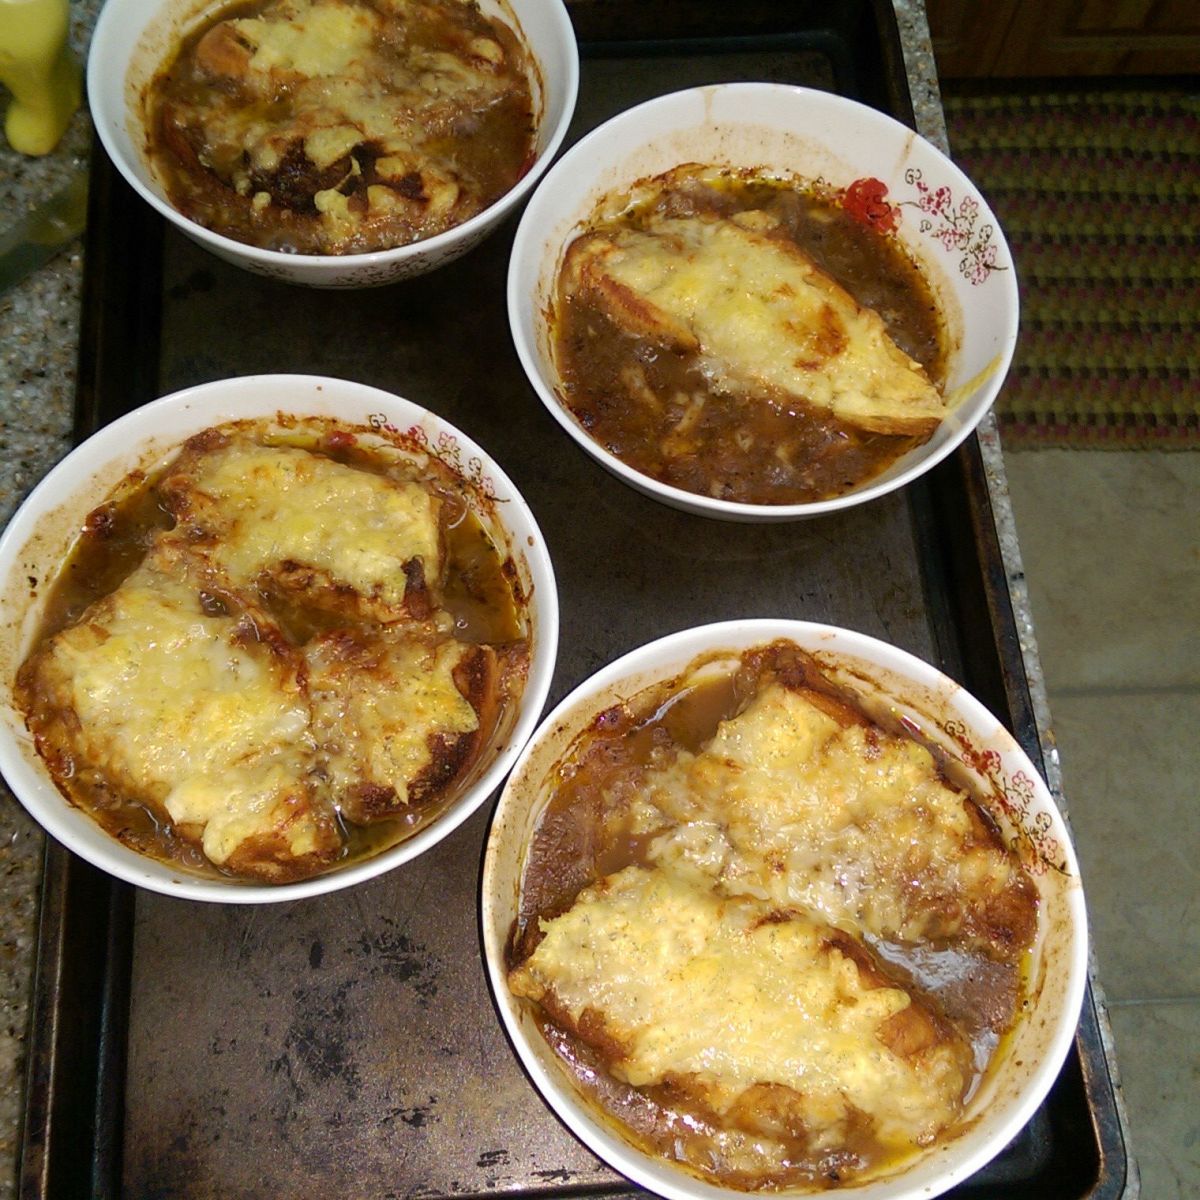 Finished french onion soup